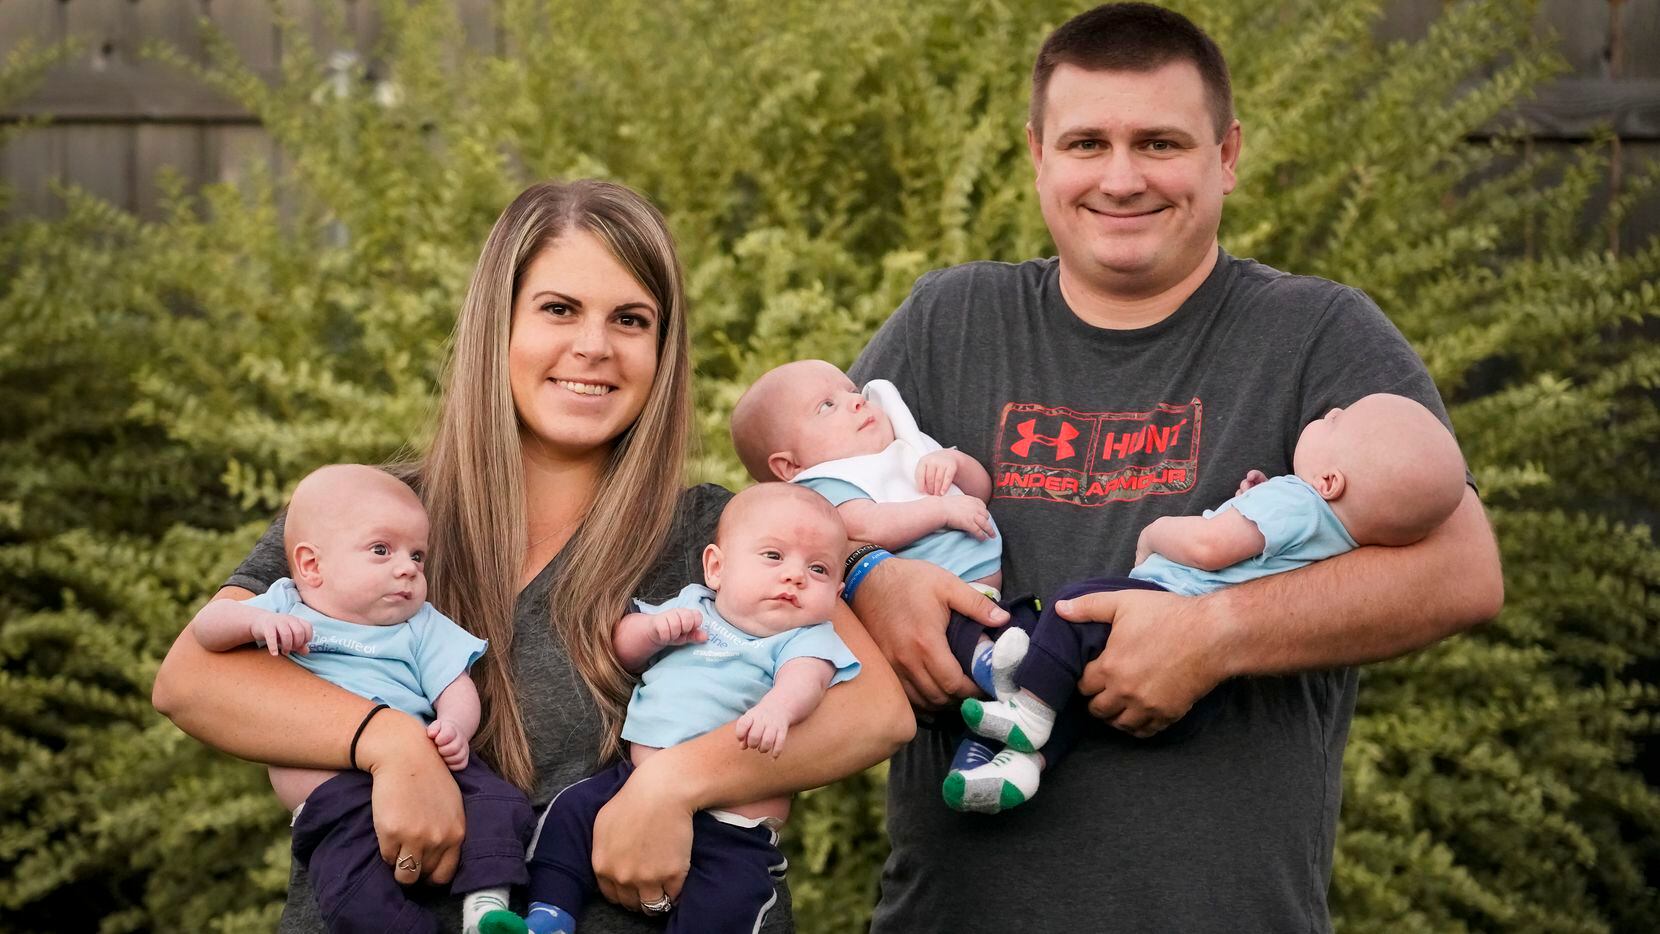 Katie and Chris Sturm with their quadruplets, from left, Daniel, Austin, Hudson and Jacob, who were born in July, photographed on Tuesday, Sept. 29, 2020, in Haslet, Texas. (Smiley N. Pool/The Dallas Morning News)